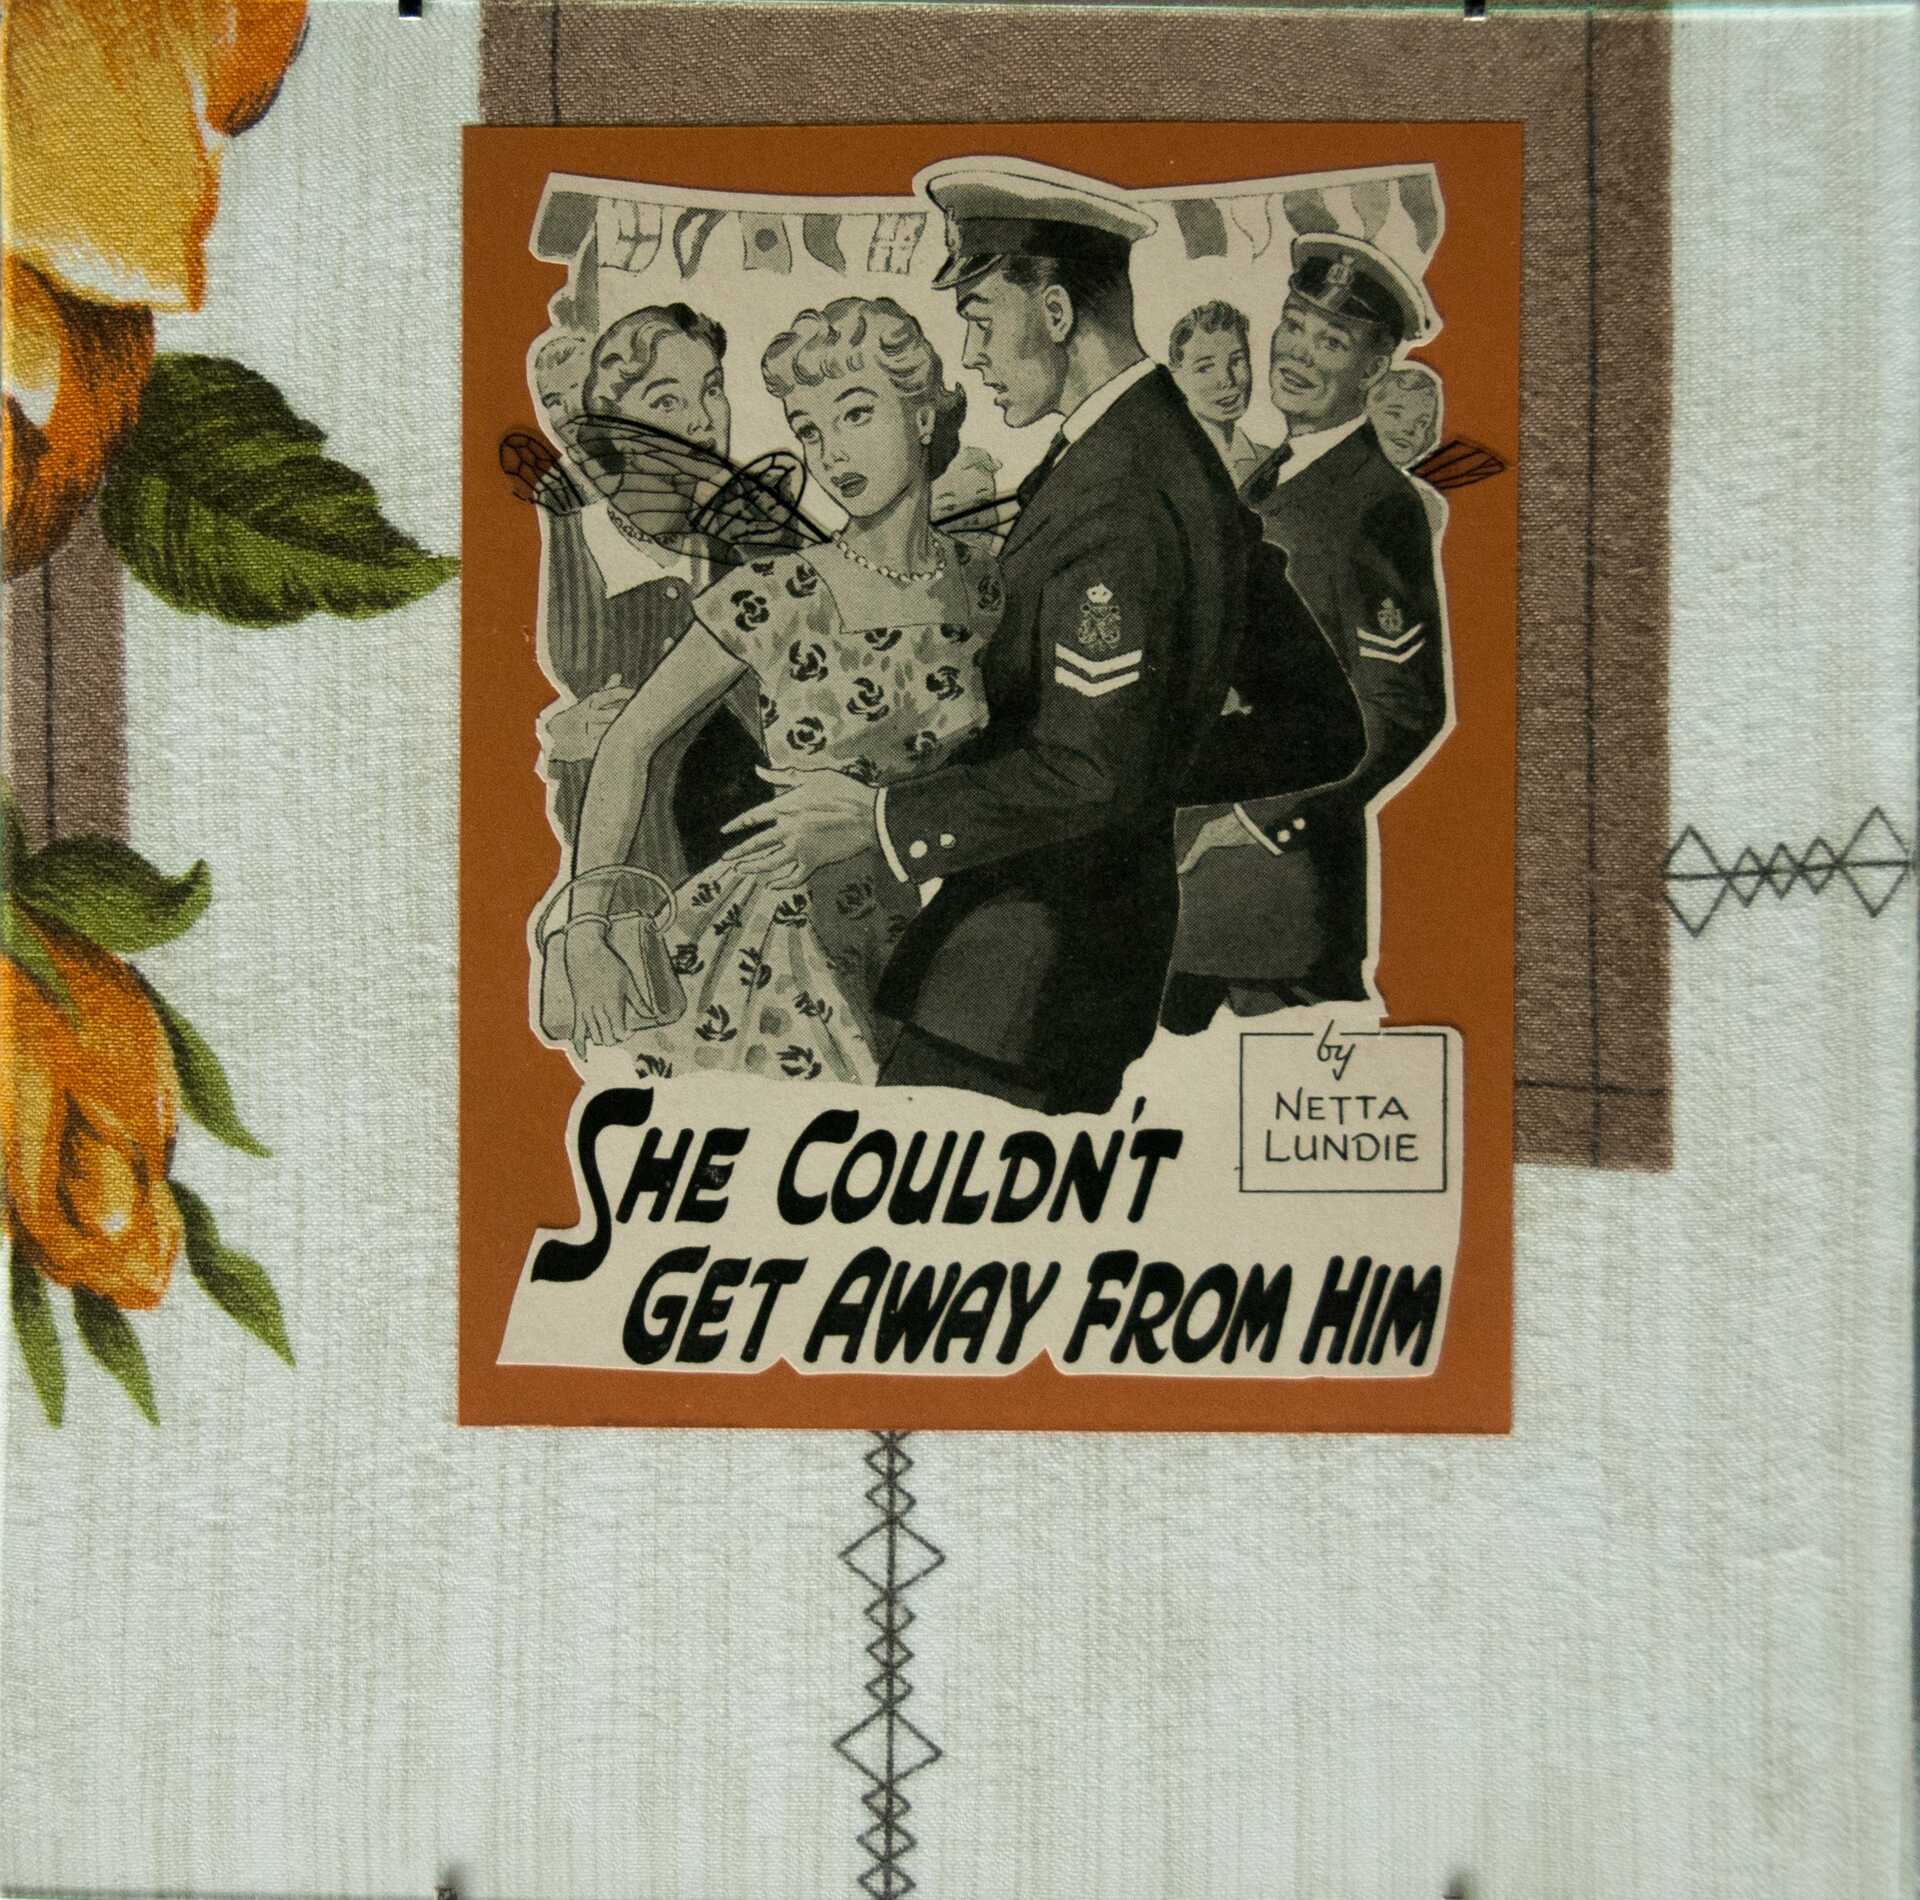 "She Couldn't Get Away From Him" by Libby Bloxham. A vintage book illustration is layered over burnt orange card and vintage fabric with a neutral white tone and printed flowers, to create a square collage. The illustration depicts a worried looking woman pulling away from a man in a military uniform, and the title 'She Couldn't Get Away From Him by Netta Lundie'. They appear to be at a party, with bunting overhead and a small crowd in the background including several women and another unformed man. Acetate insect wings have been added to all the women.